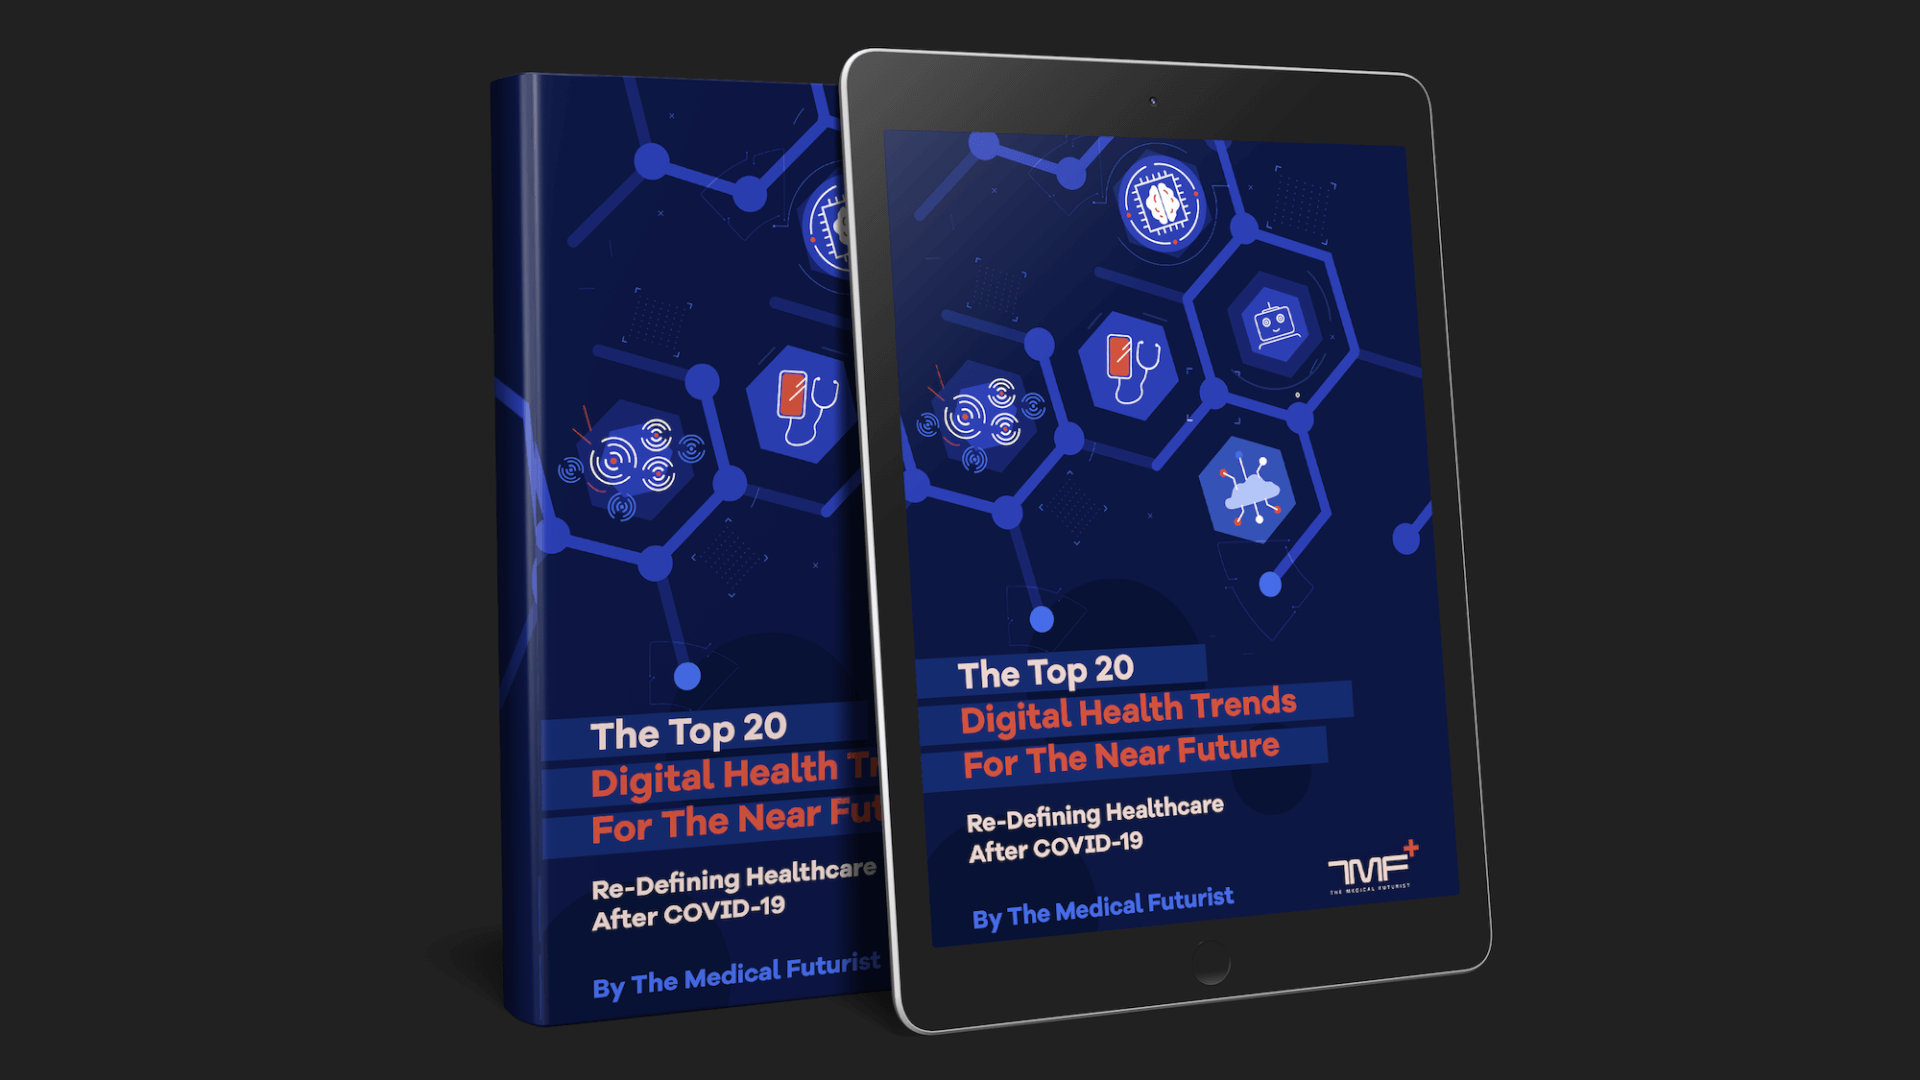 The Top 20 Digital Health Trends For The Near Future: A New E-Book